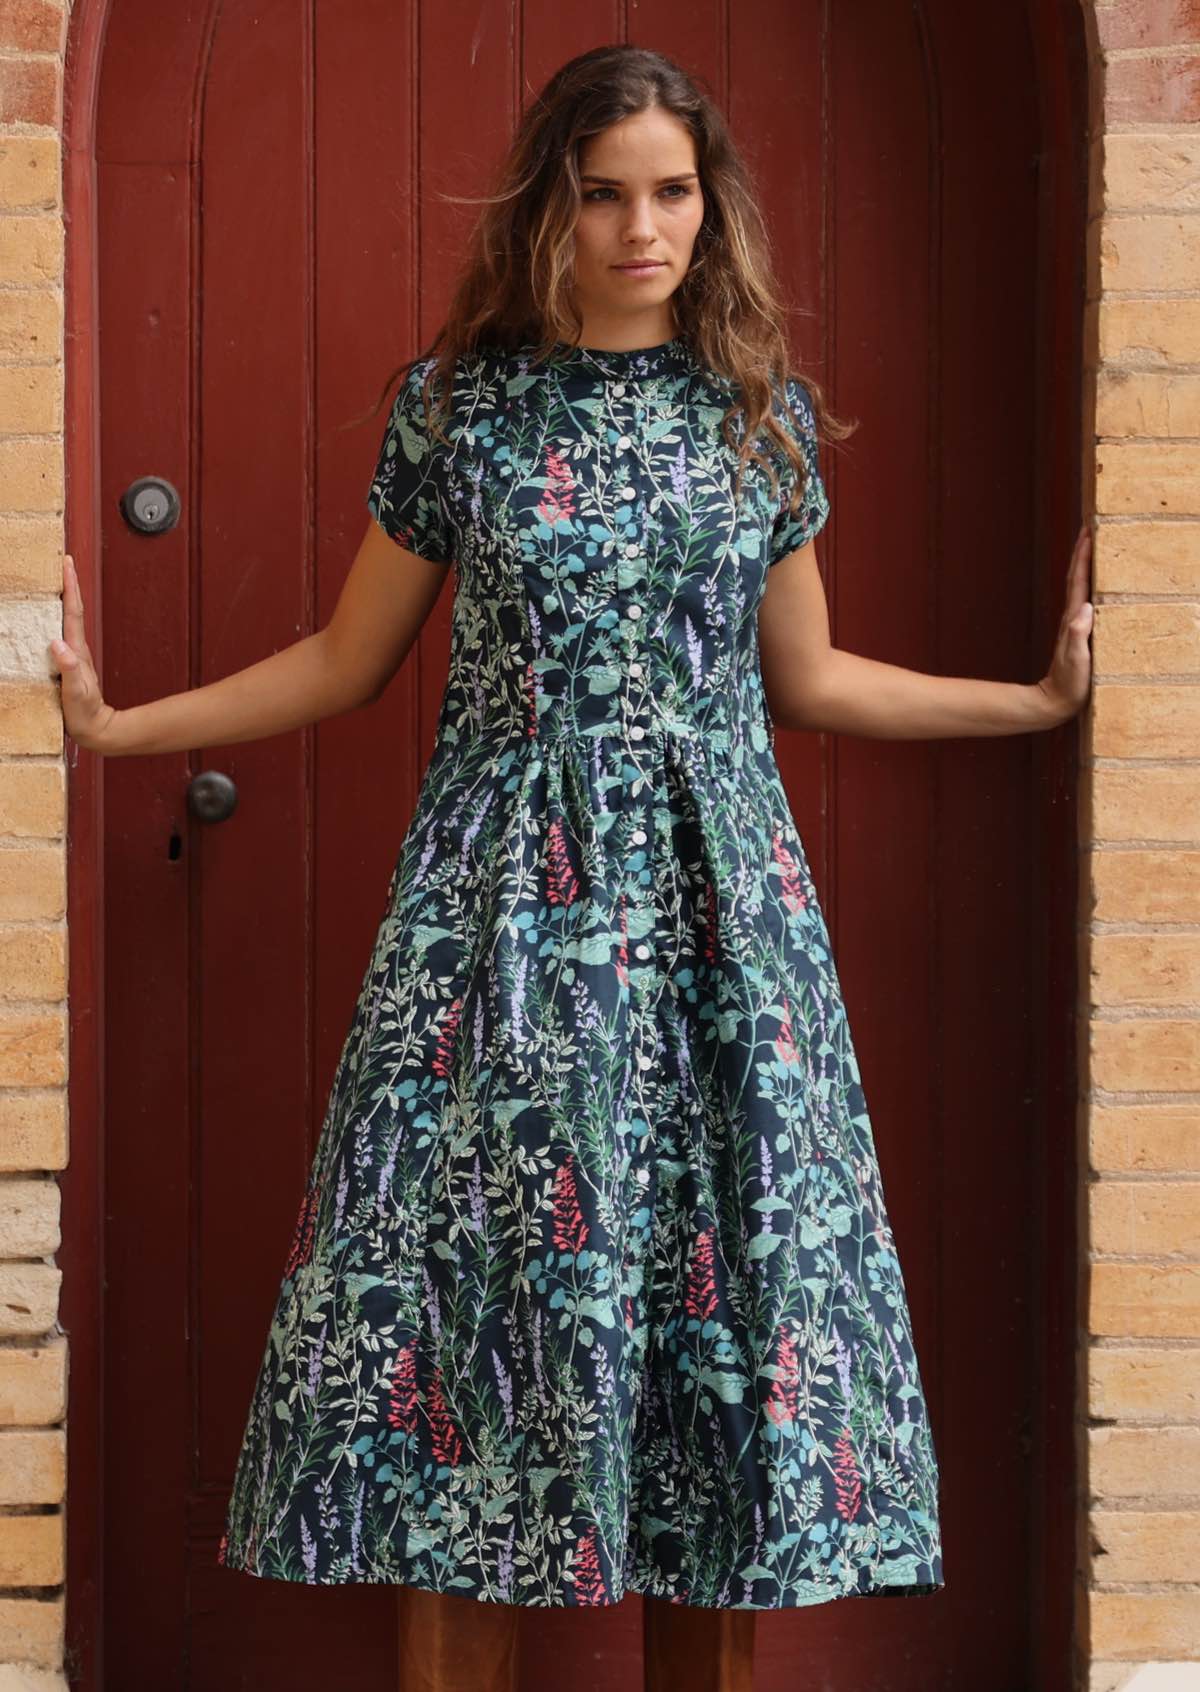 Cotton retro dress in gorgeous floral print with deep teal base